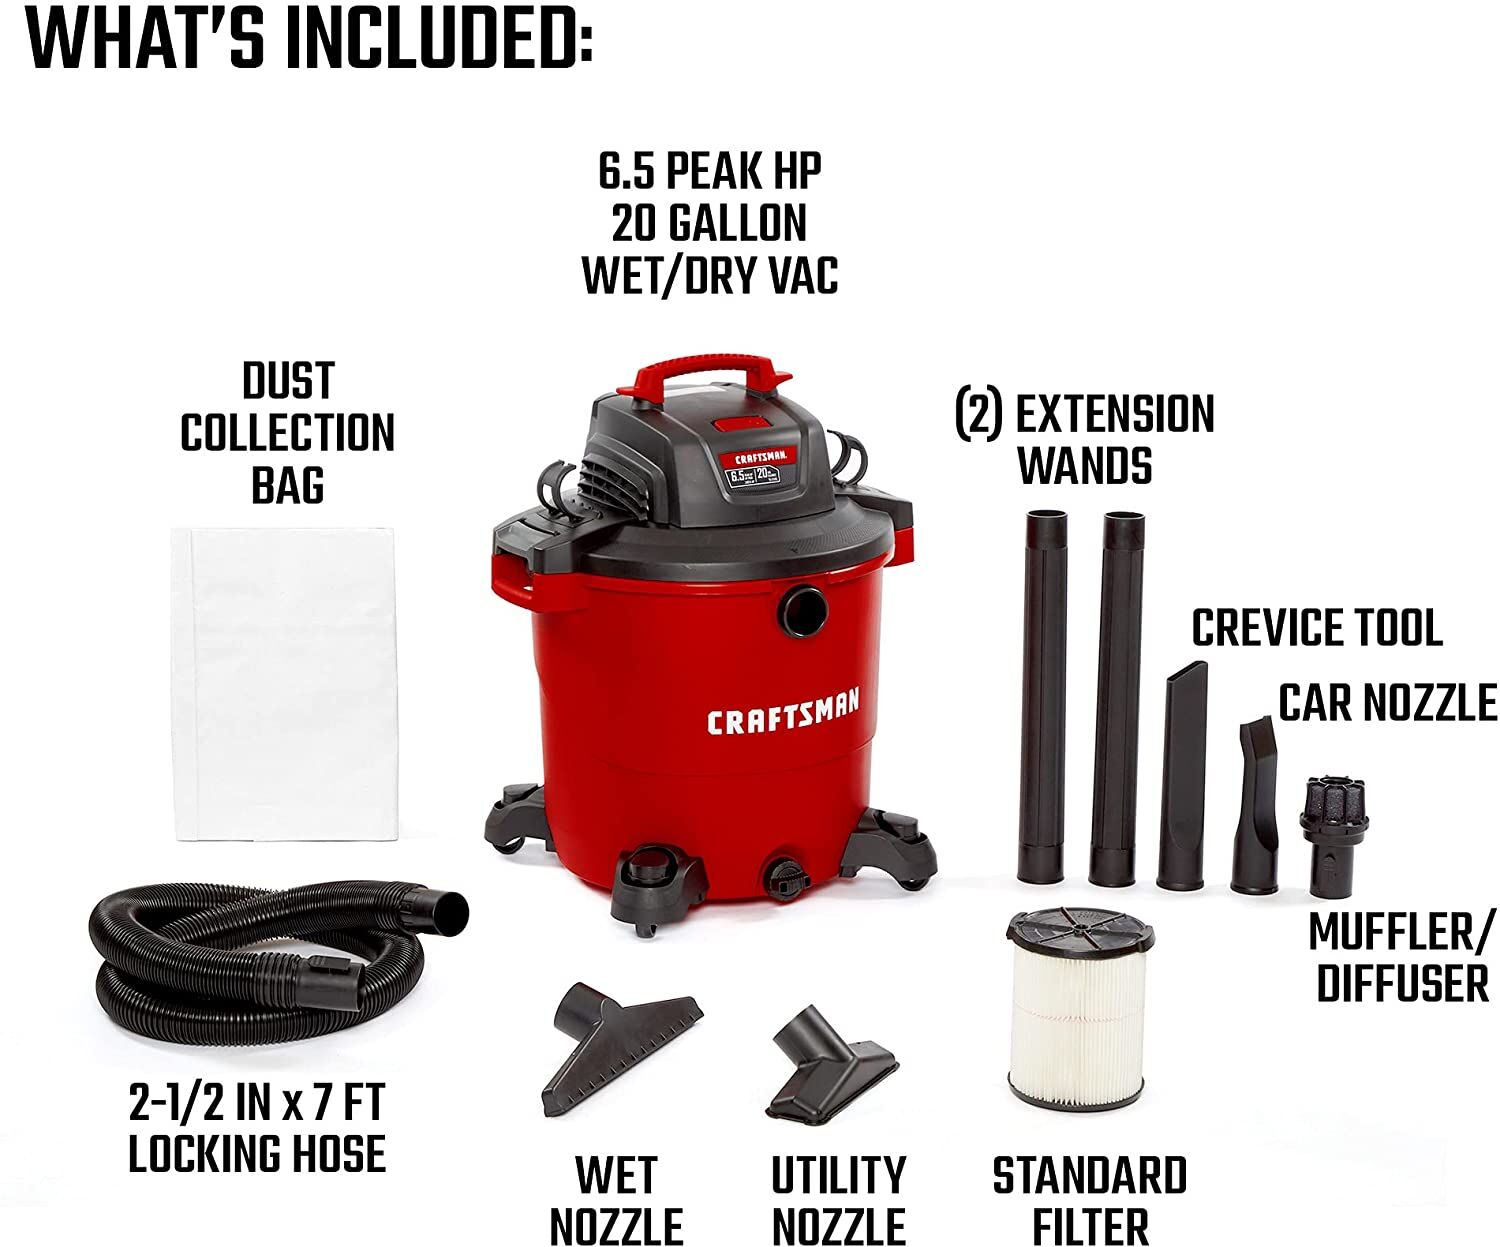 Graphic of CRAFTSMAN Accessories: Vacuums highlighting product features